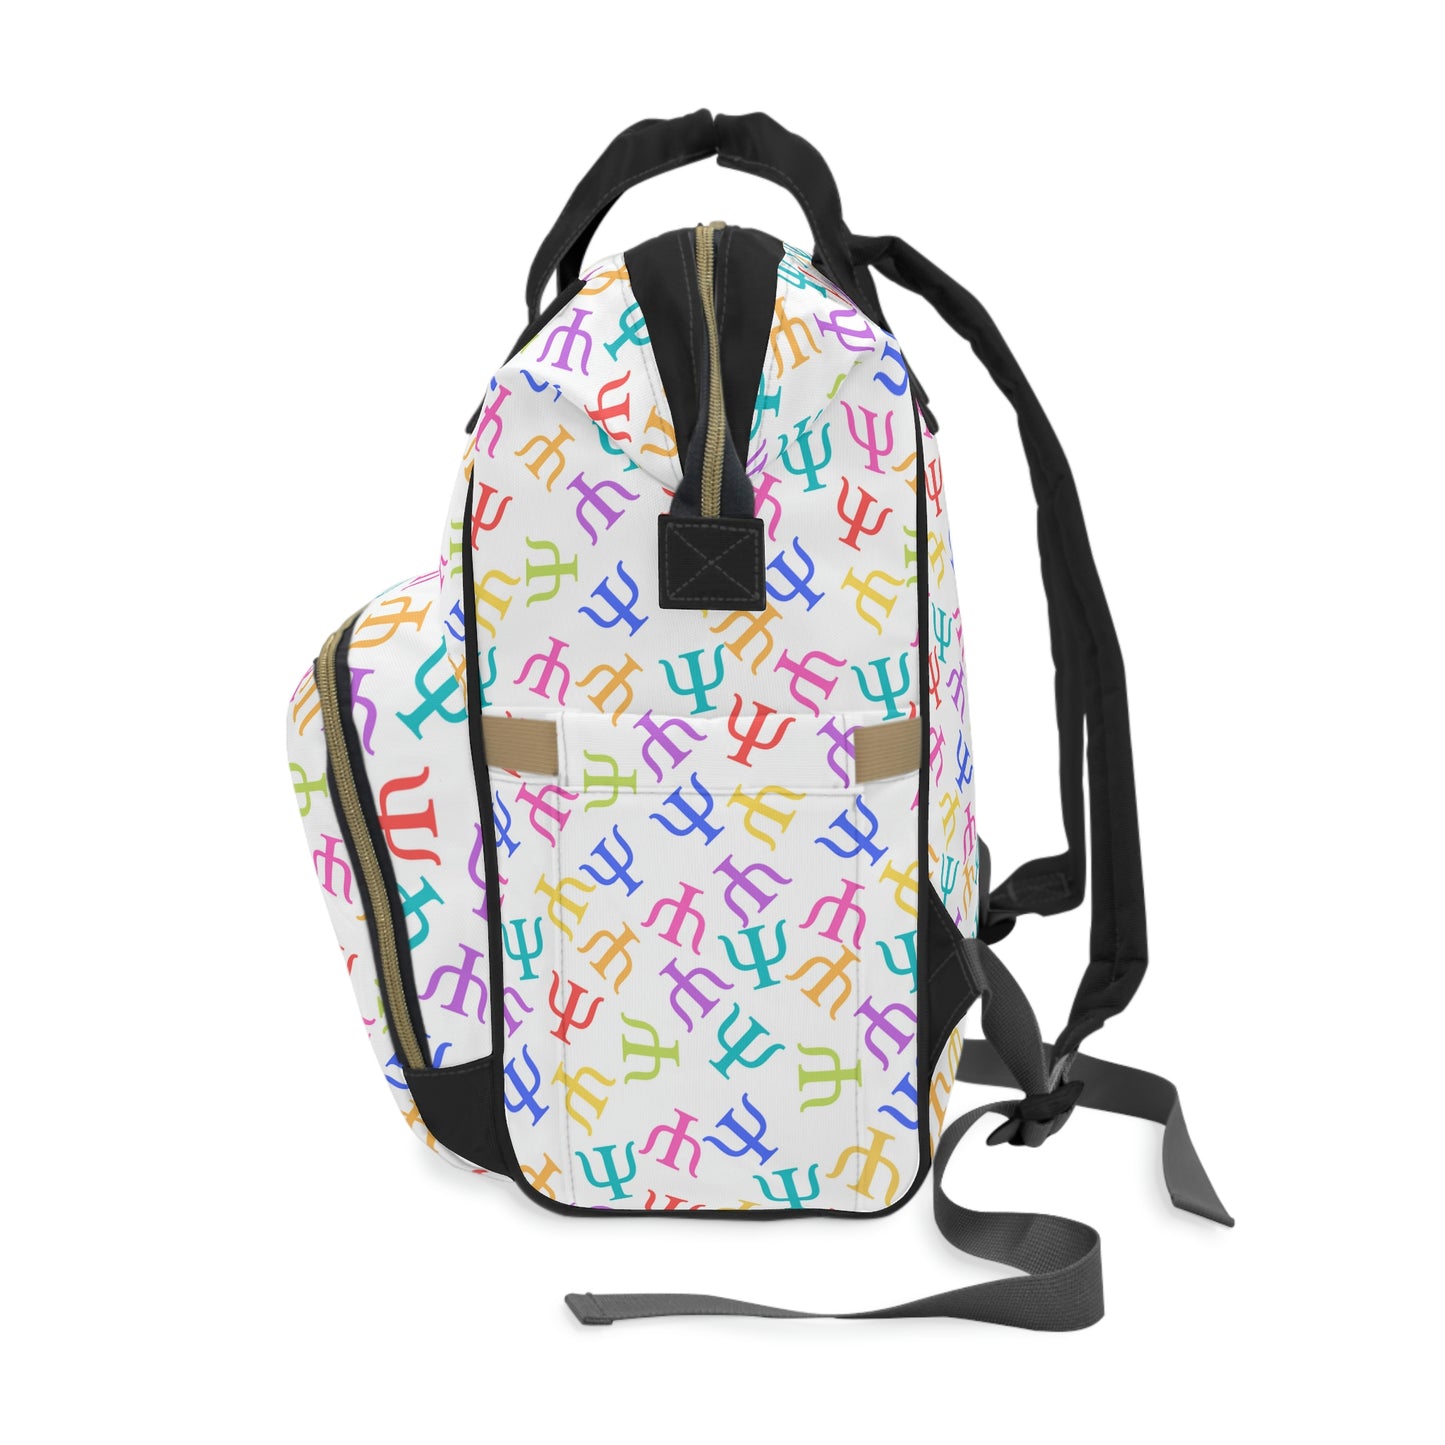 Bright Rainbow on White Psych Symbol Backpack